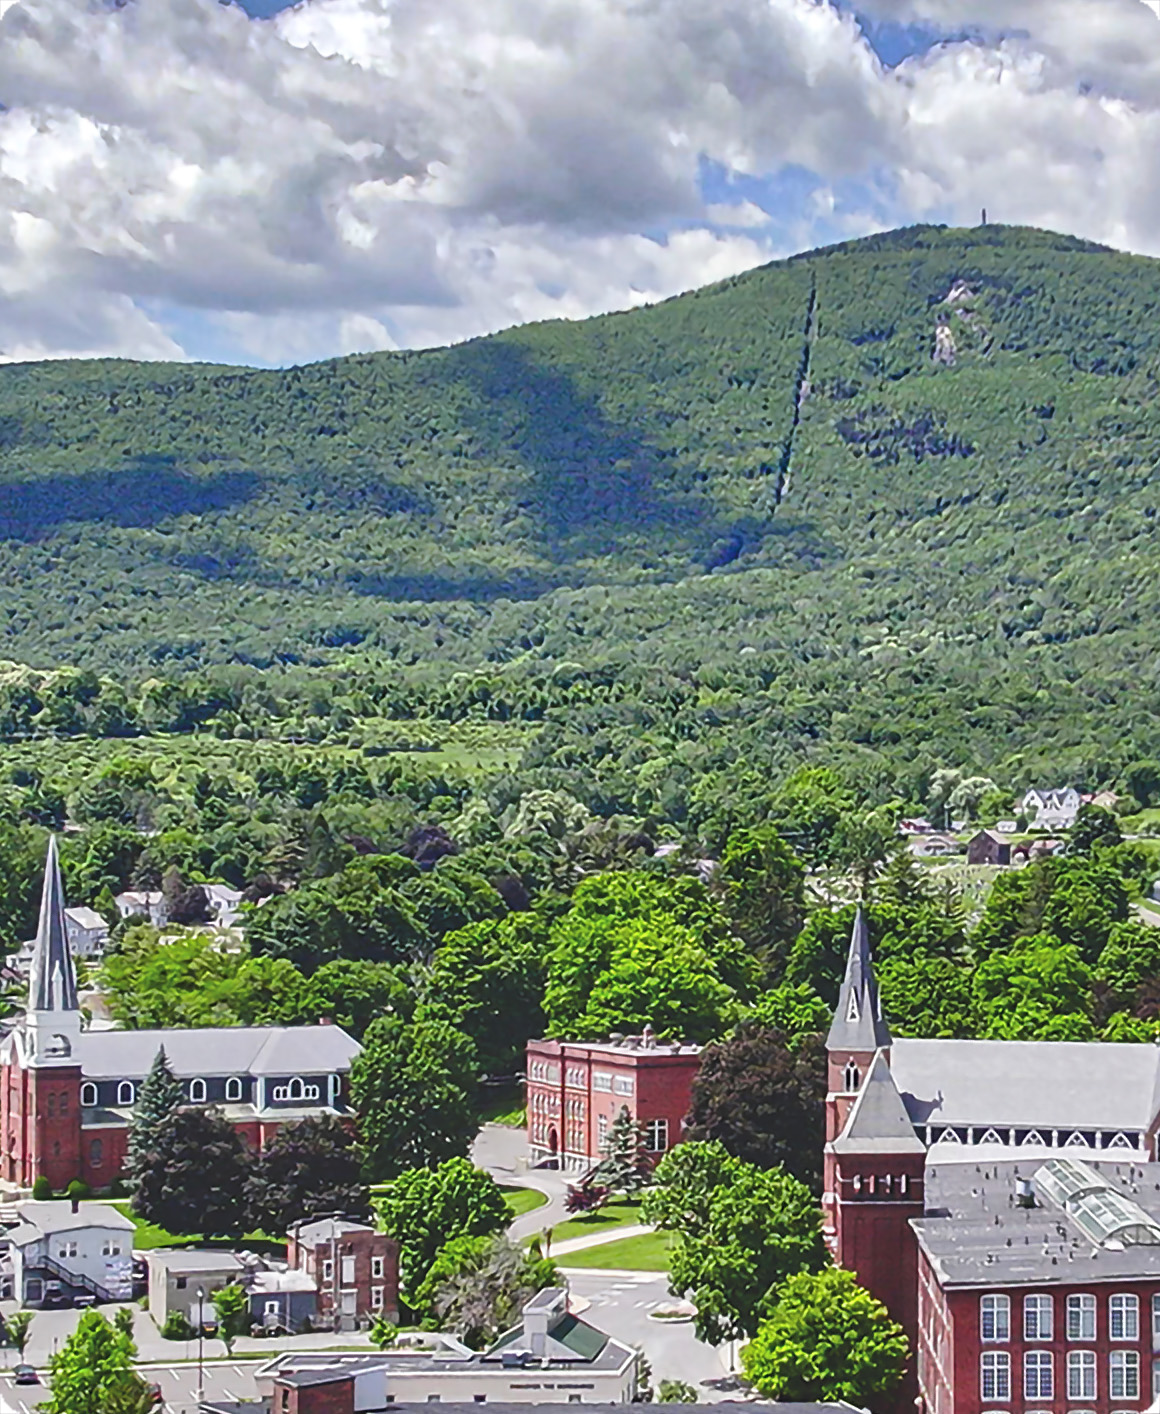 Drone photo of Adams and Mount Greylock